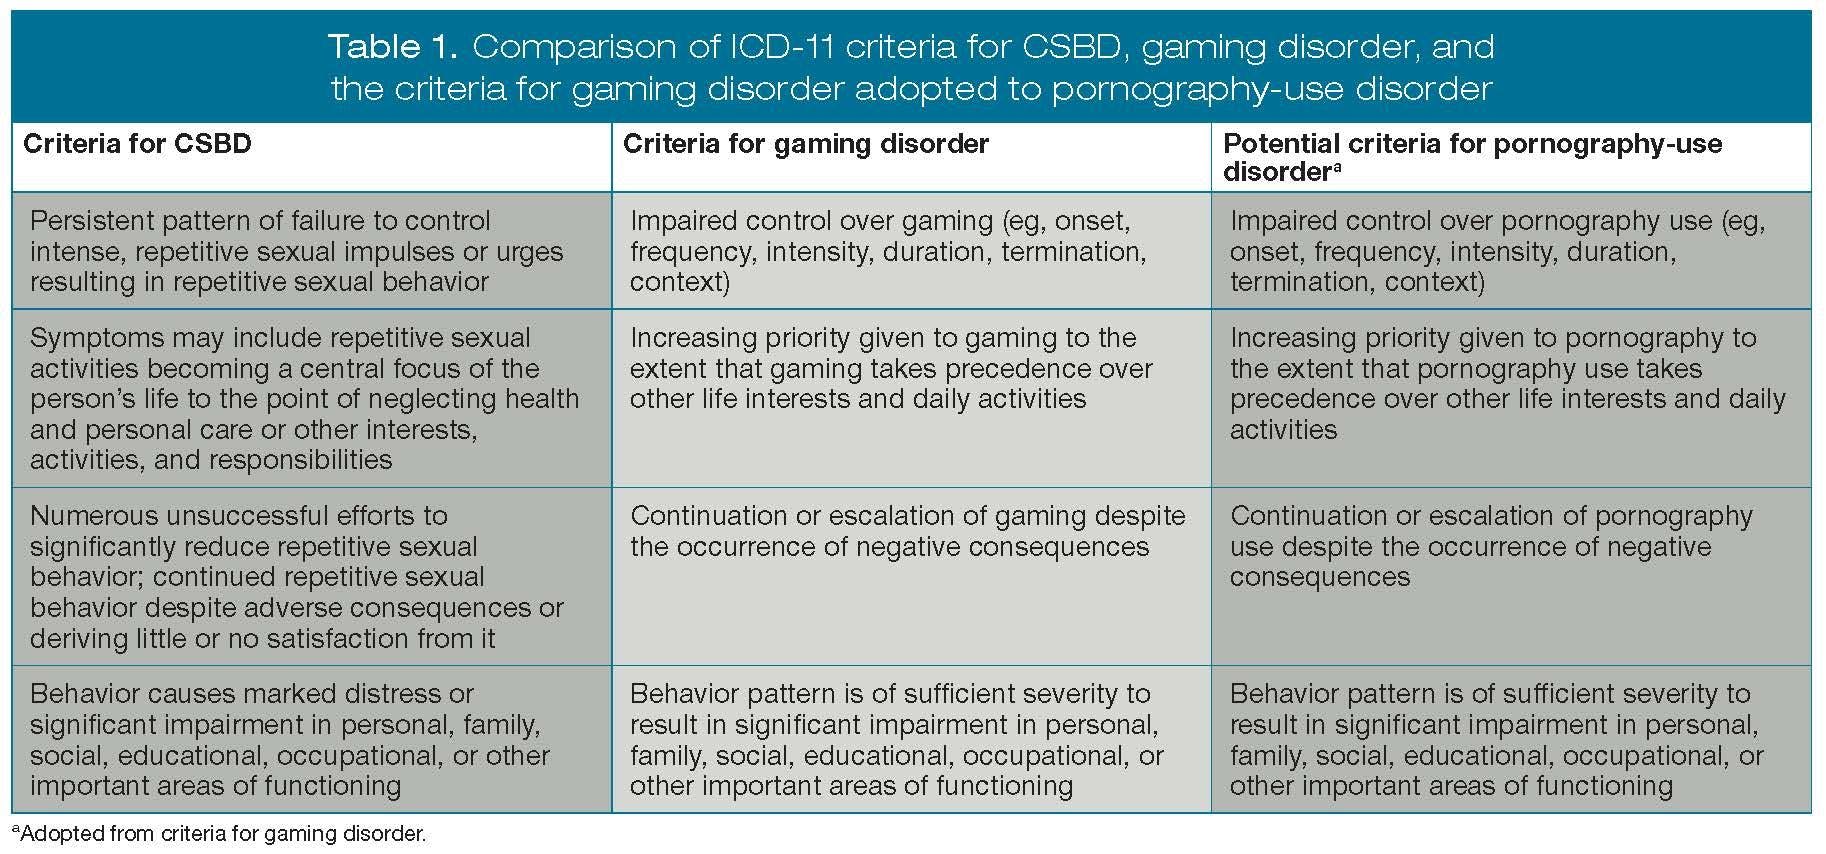 Comparison of ICD-11 criteria for CSBD, gaming disorder, and  the criteria for gaming disorder adopted to pornography-use disorder